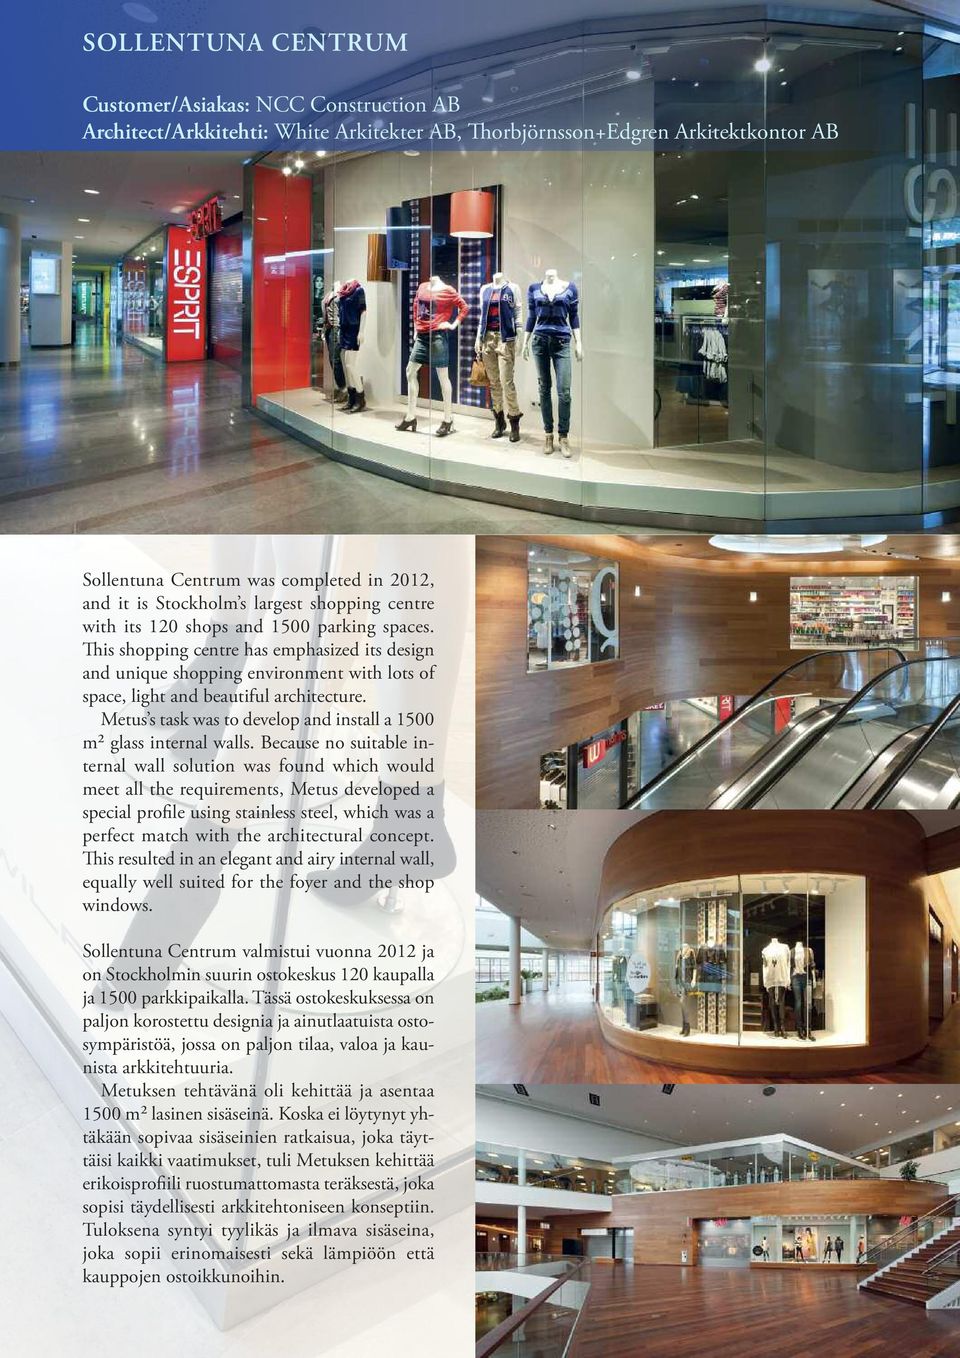 Metus s task was to develop and install a 1500 m² glass internal walls.